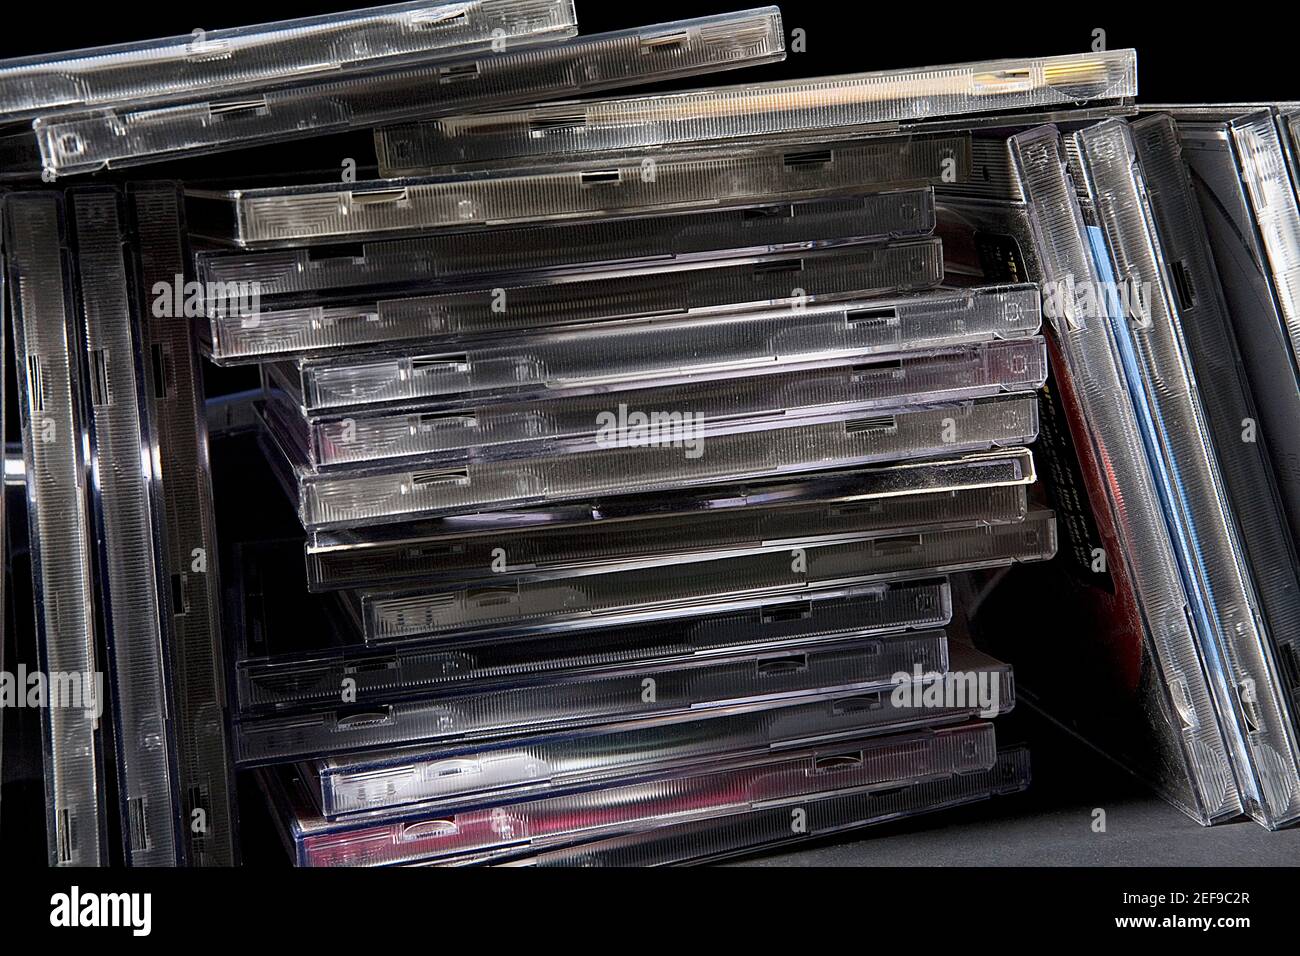 Close-up of a stack of CD cases Stock Photo